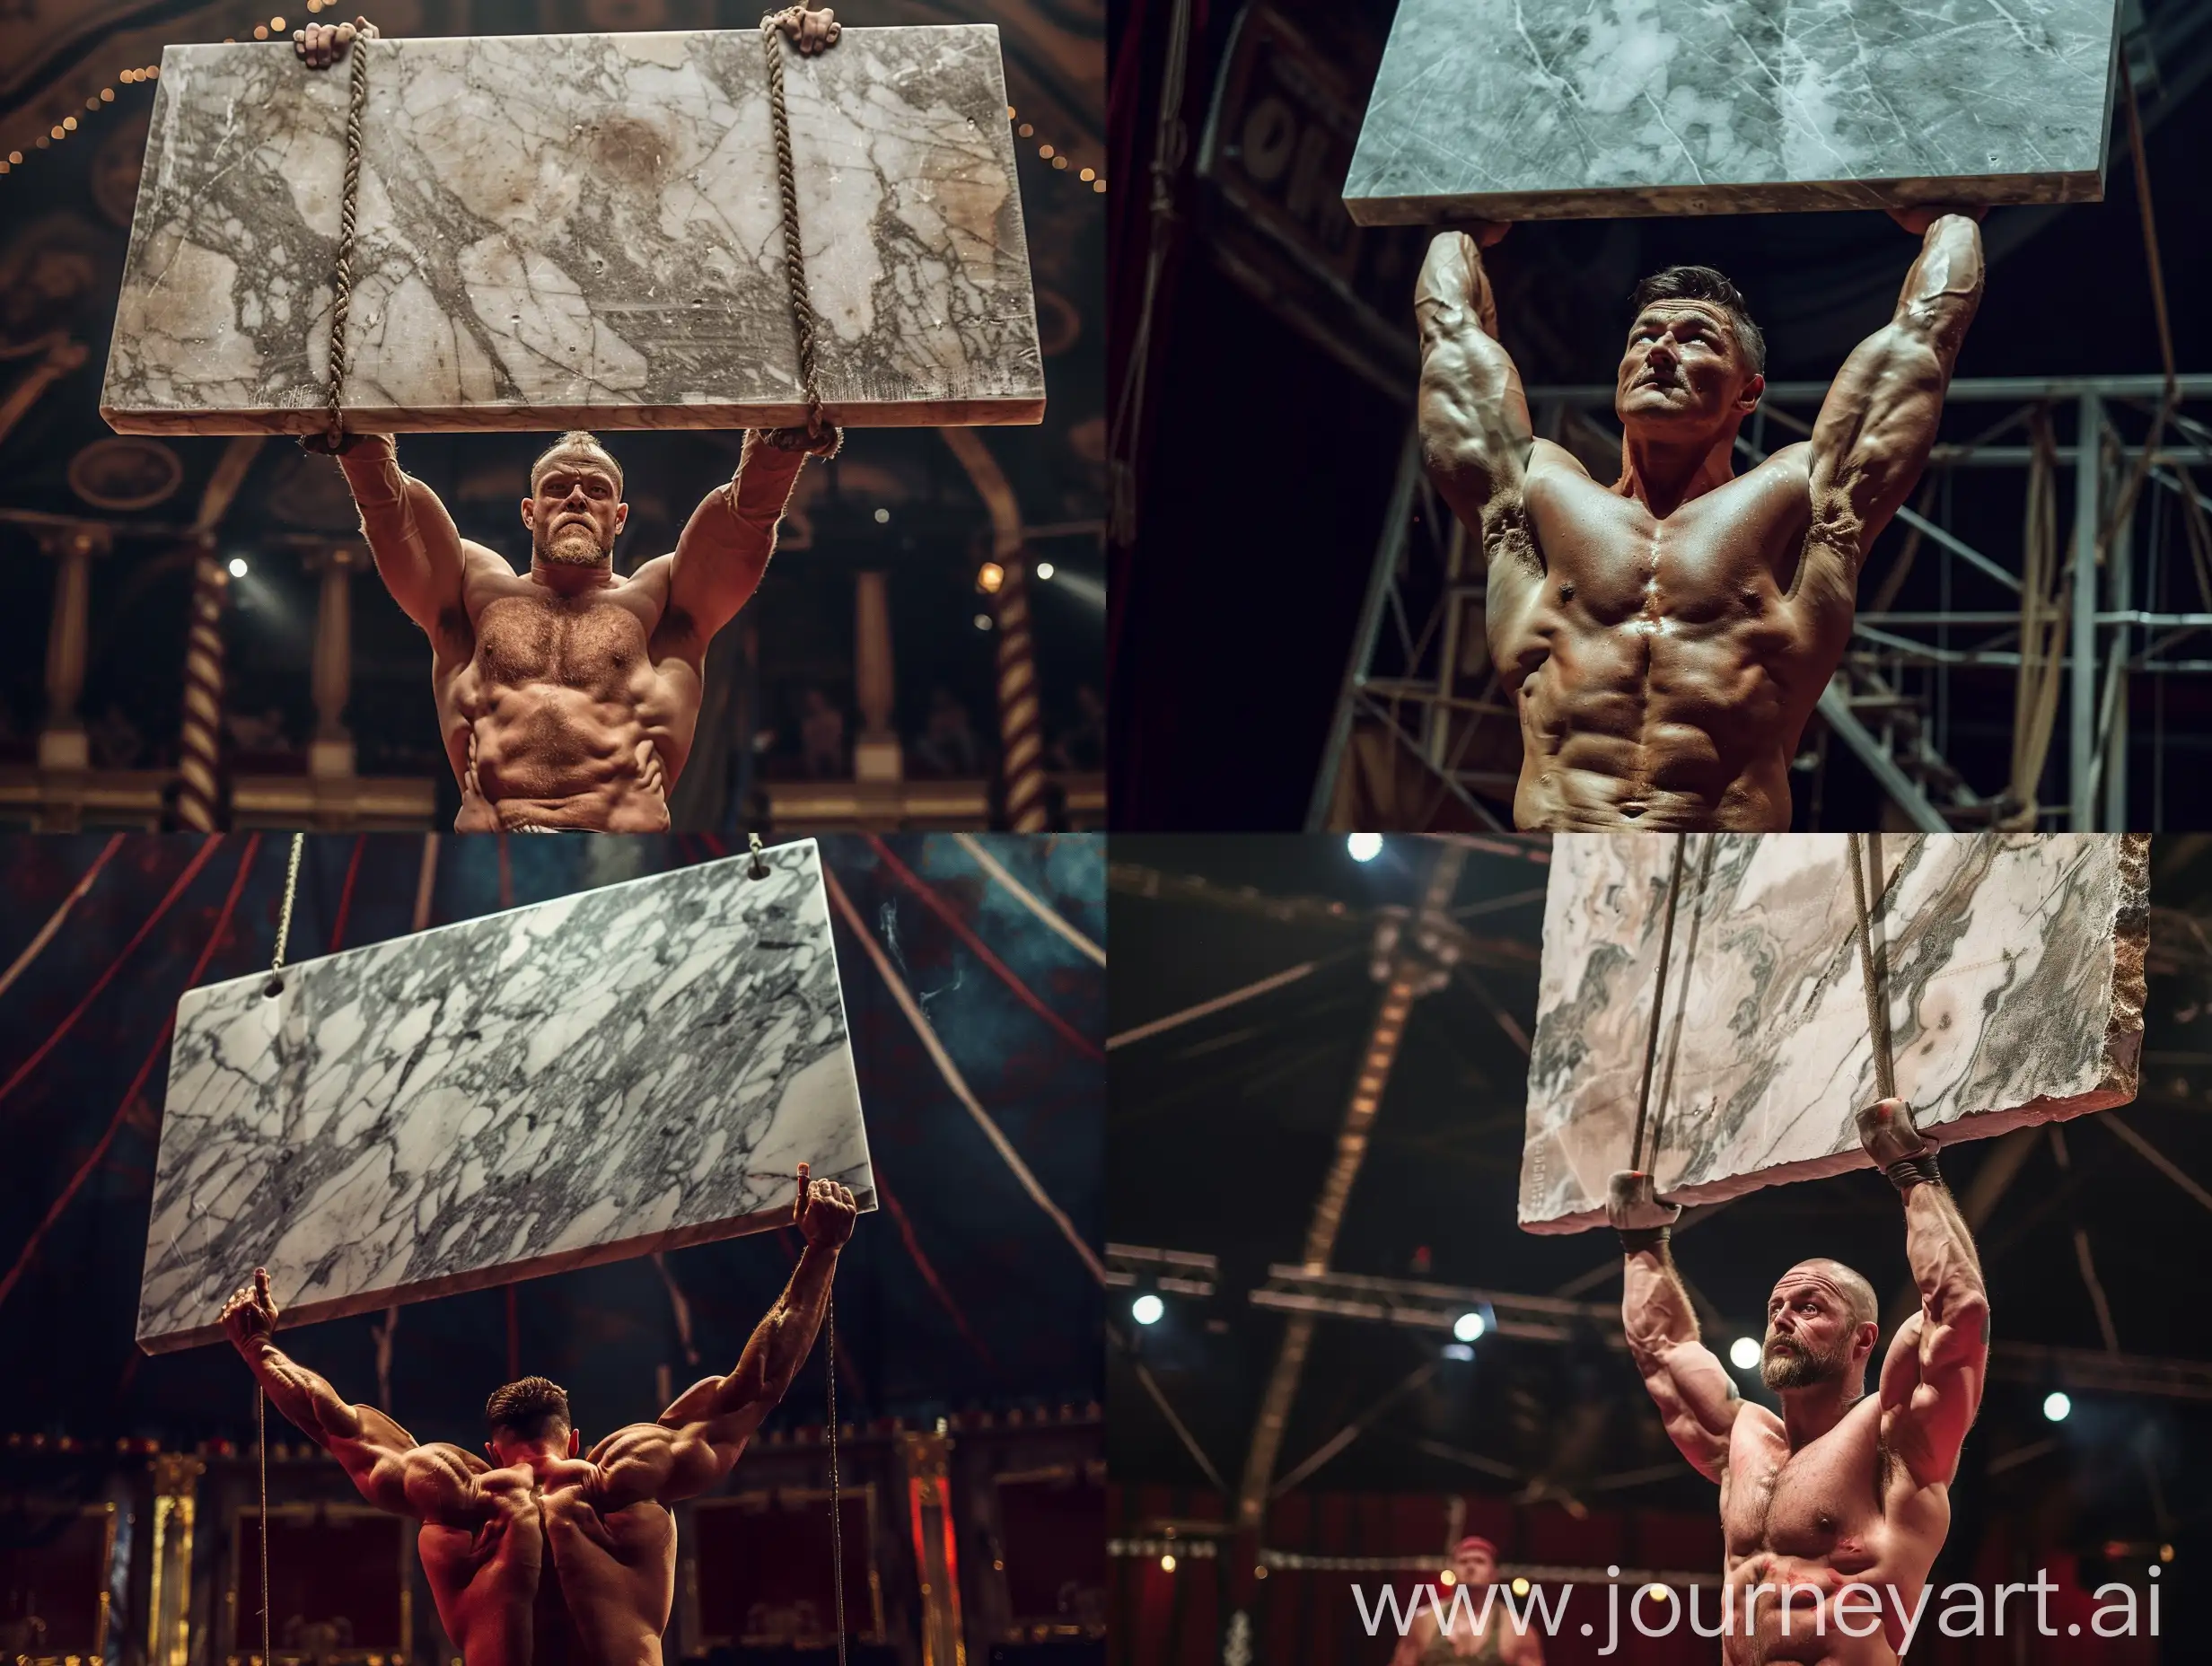 Cinematic-Strongman-Lifts-Massive-Marble-Slab-at-Circus